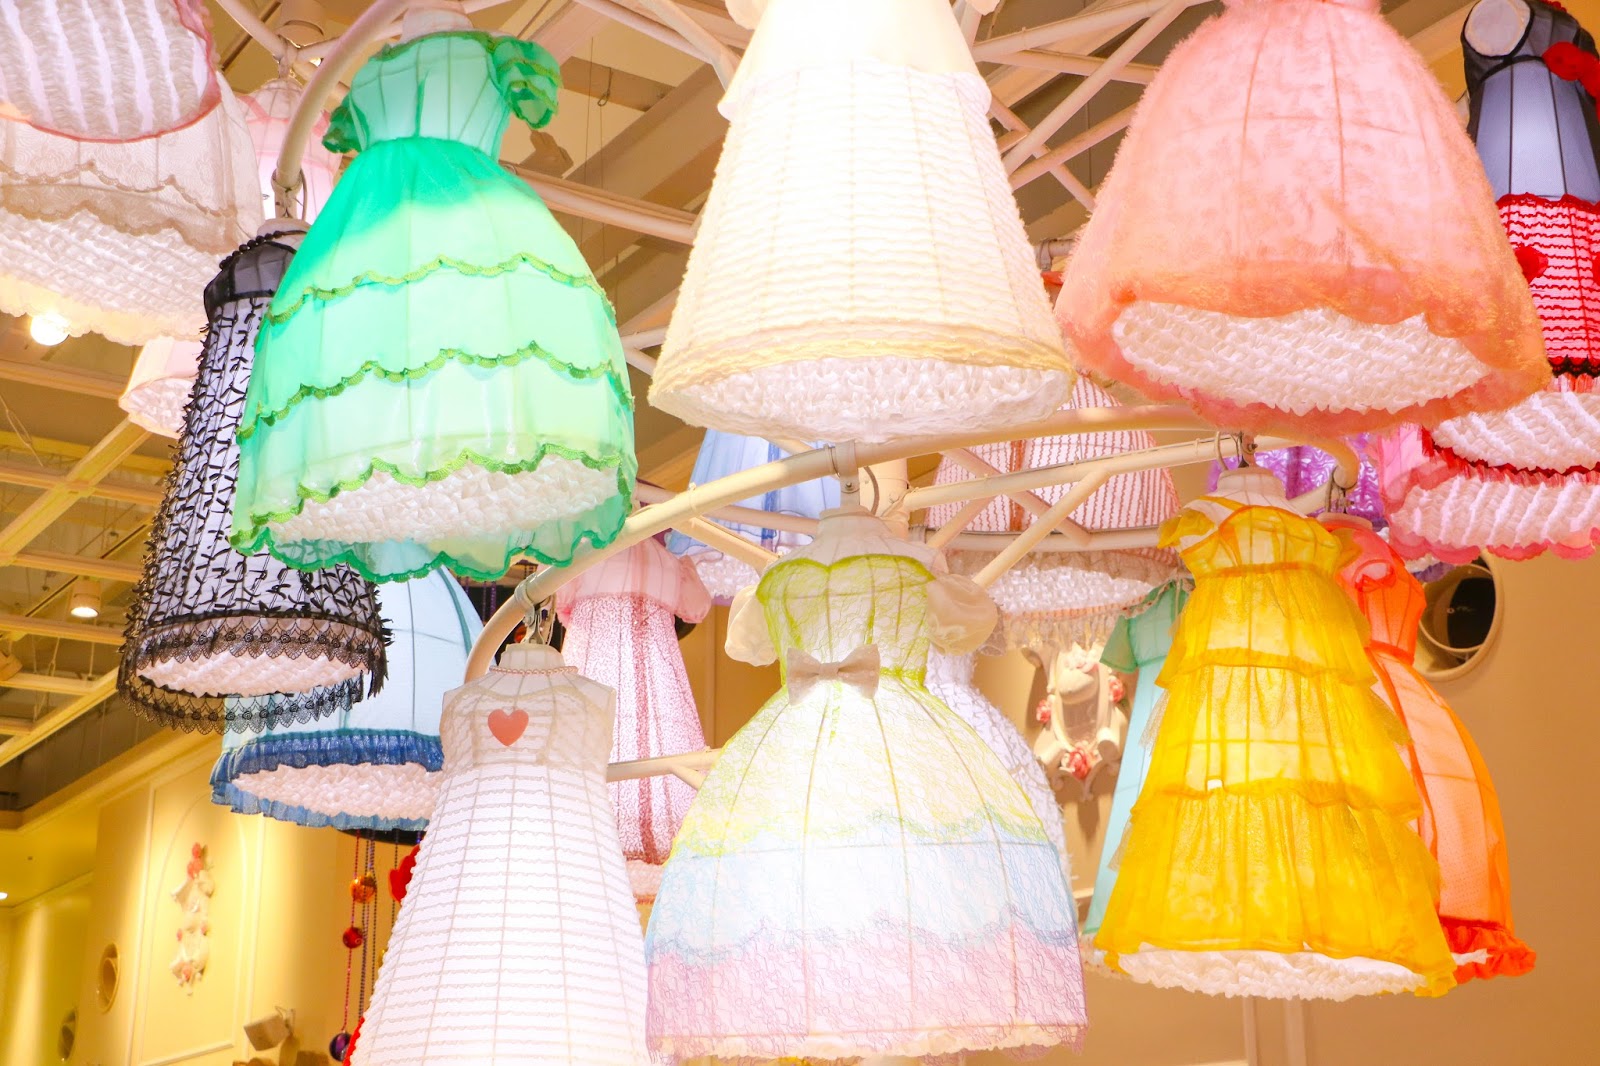 The Ultra kawaii Sanrio Puroland theme park is a must see in Tokyo! Click through for more info and photos